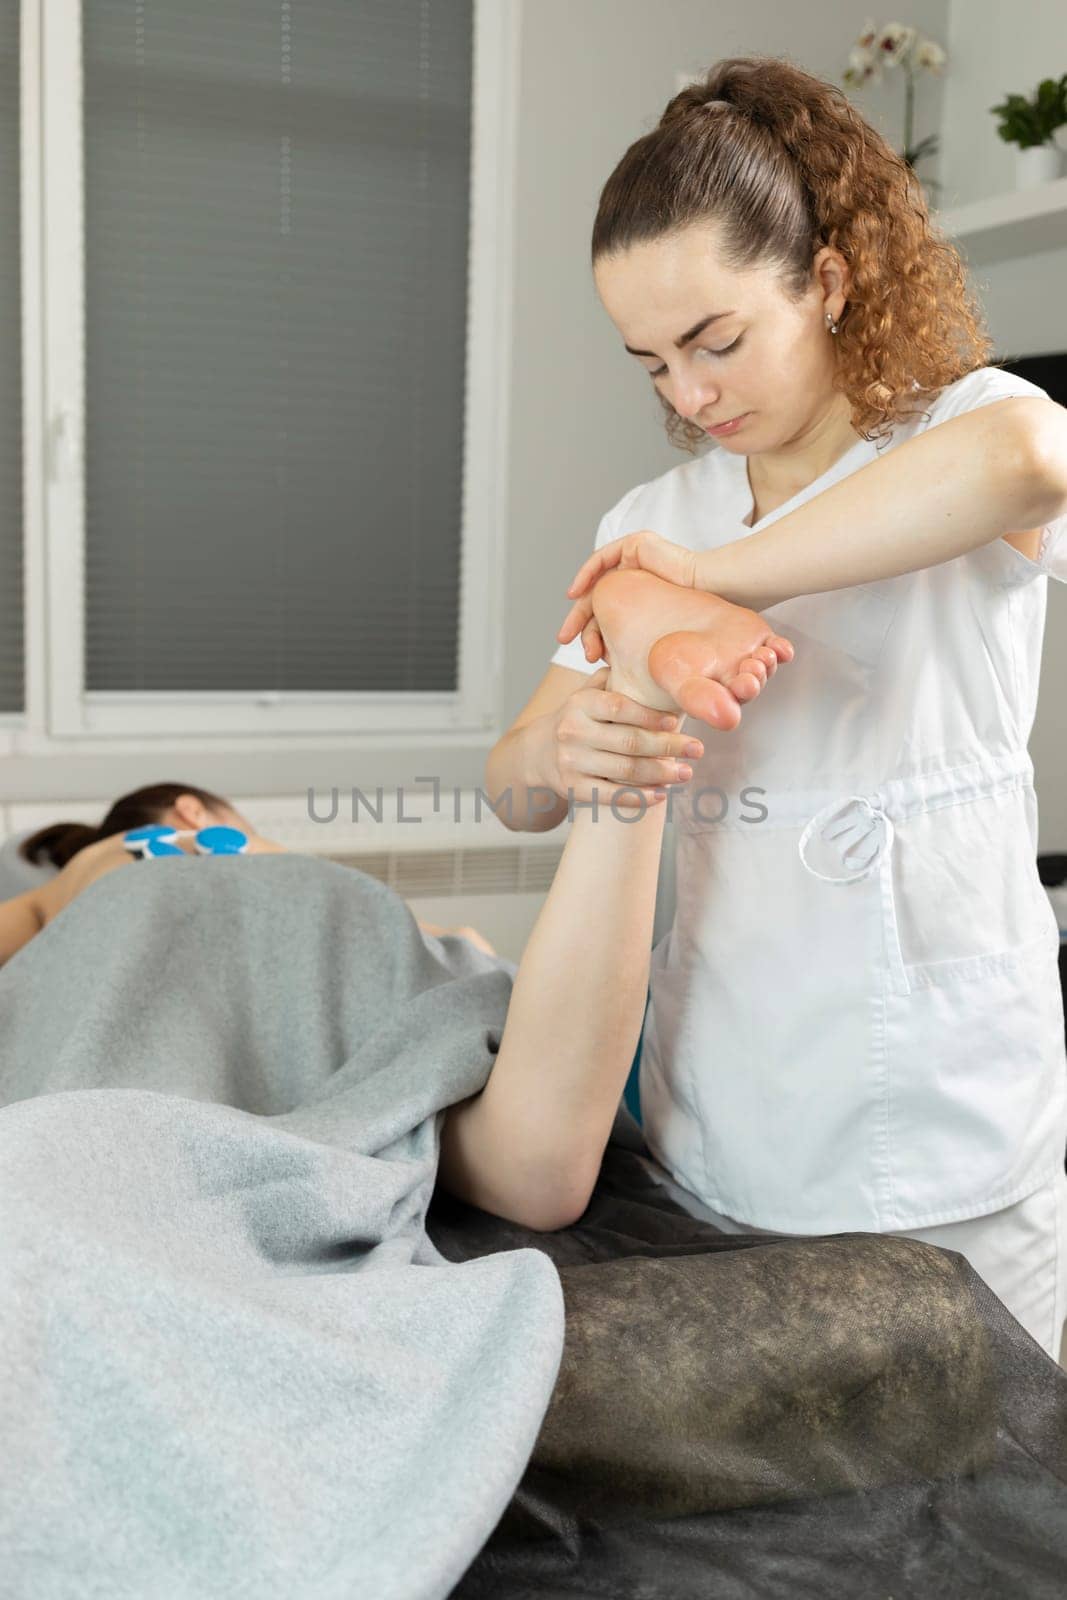 Rehabilitation Specialist, Physical Therapist Makes Foot Massage To Patient With Cerebral Palsy, Scoliosis. Health Specialist, Rehabilitation. Vertical plane. High quality photo